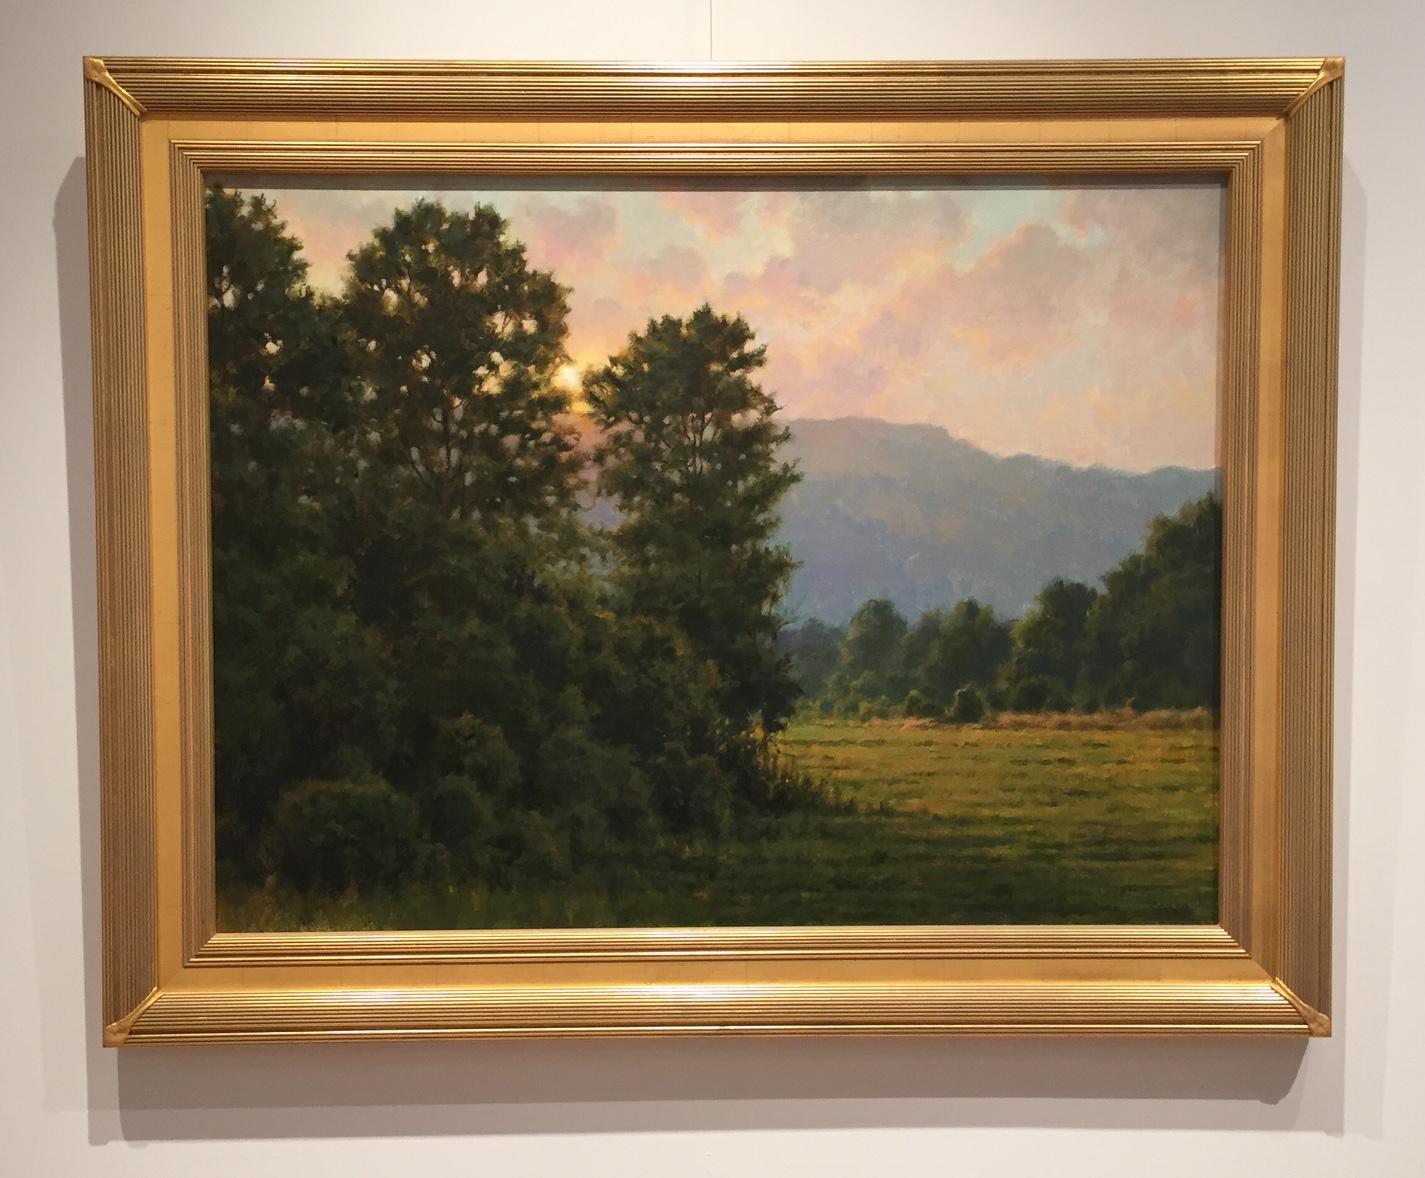 Frank Corso Landscape Painting - Late Afternoon Light